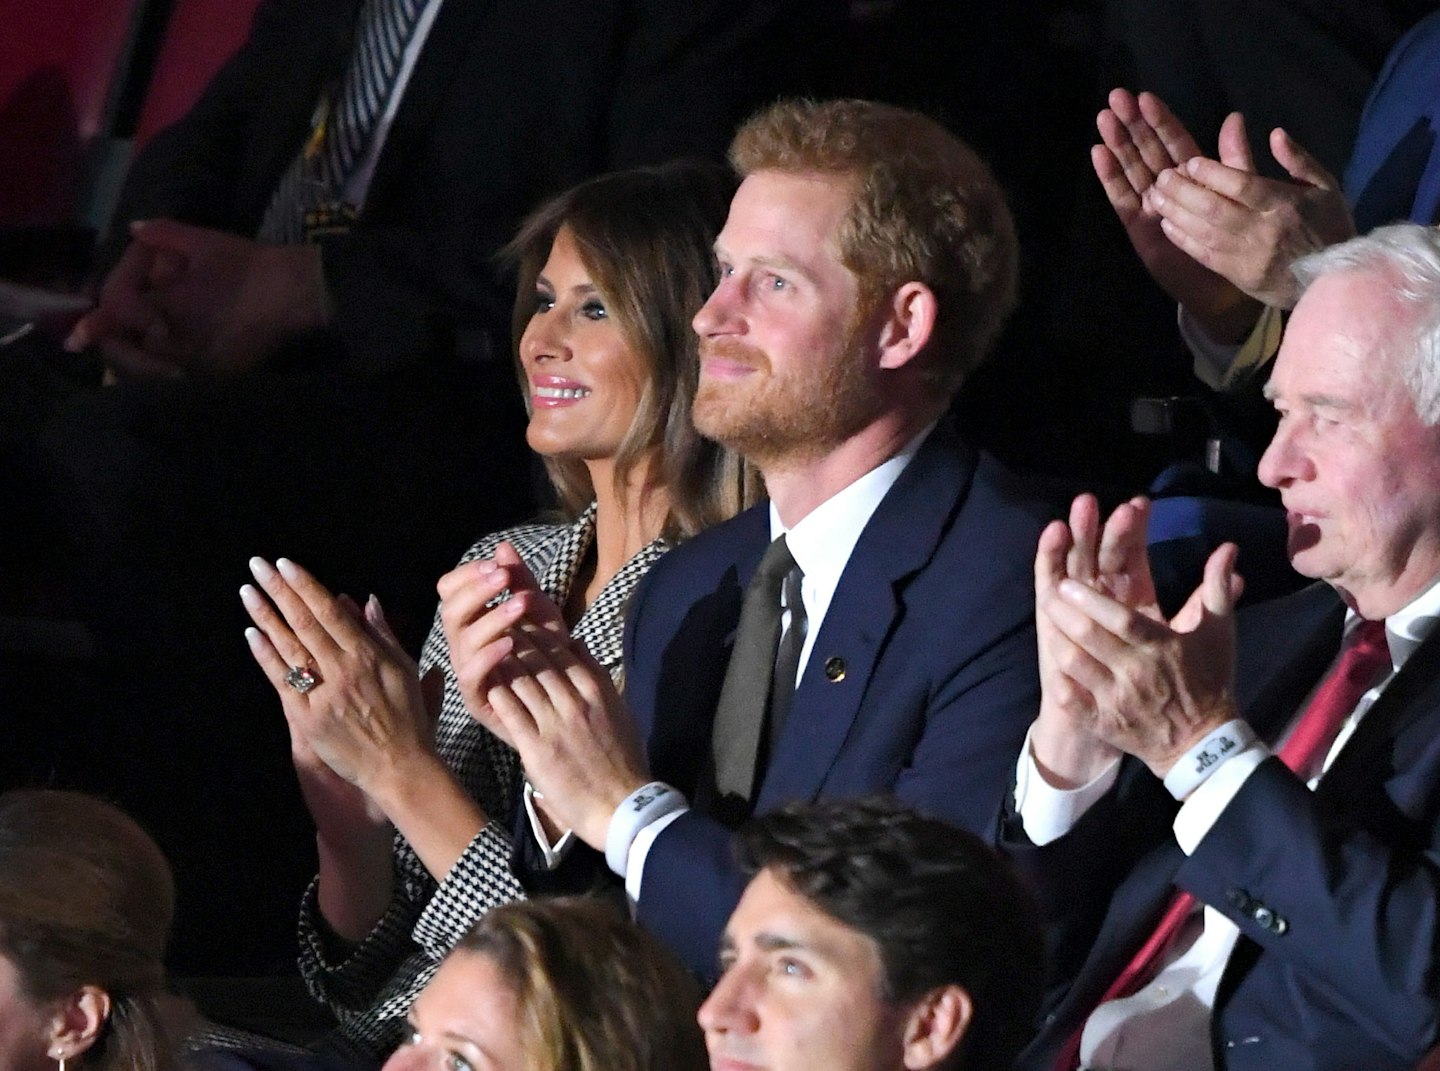 Prince Harry and Melania Trump at the Invictus Games